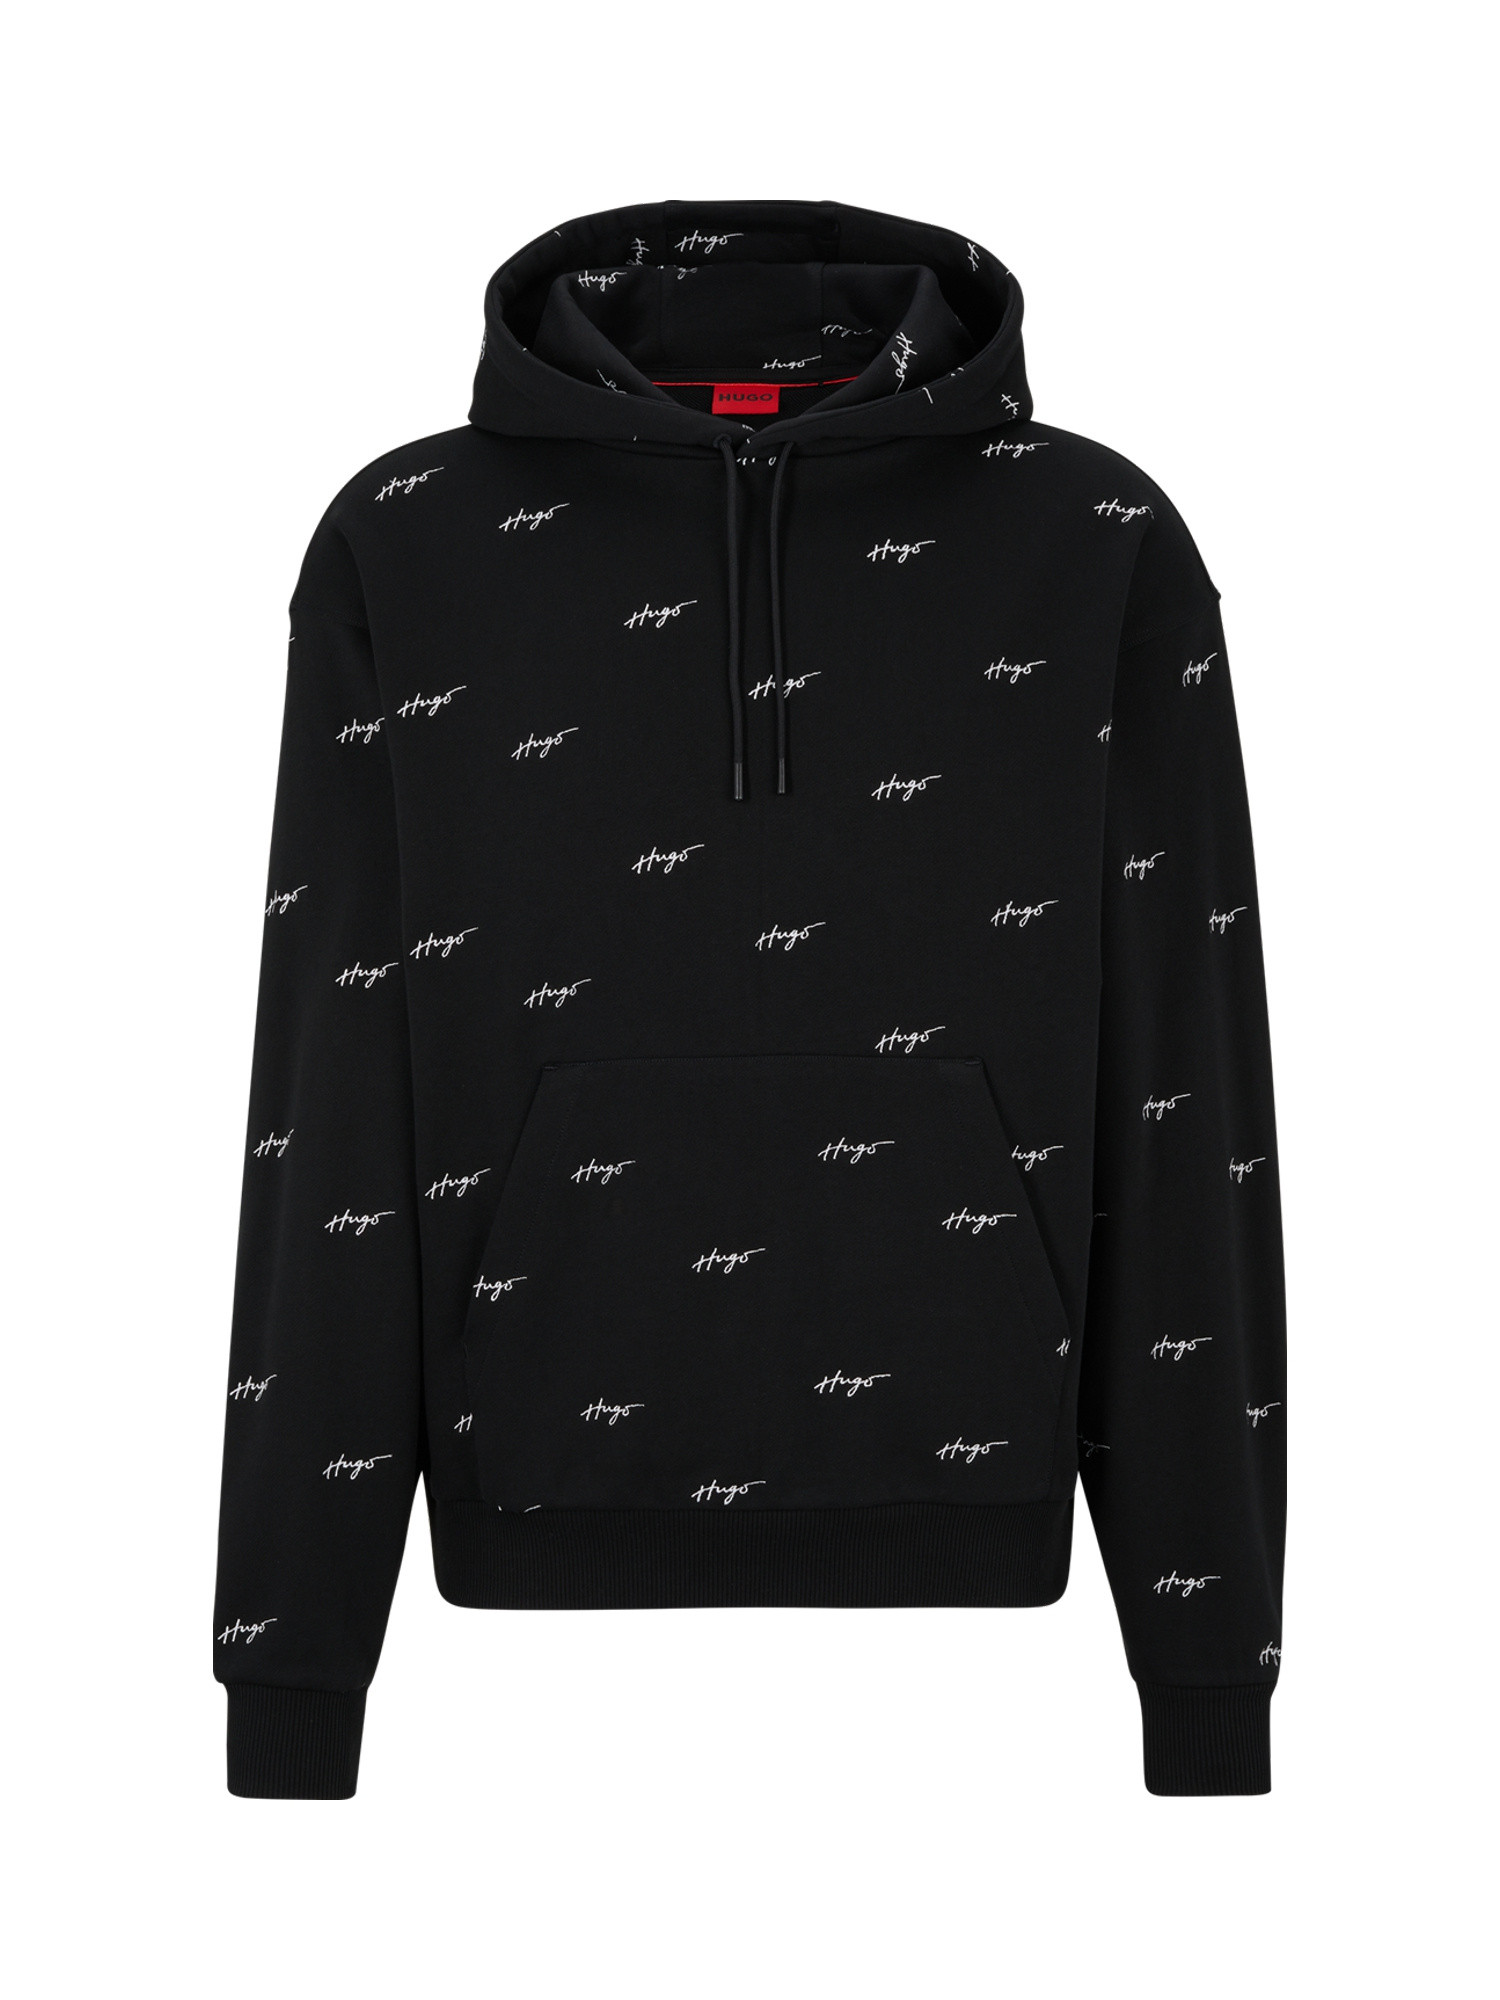 Hugo - Cotton hoodie with all over logo, Black, large image number 0